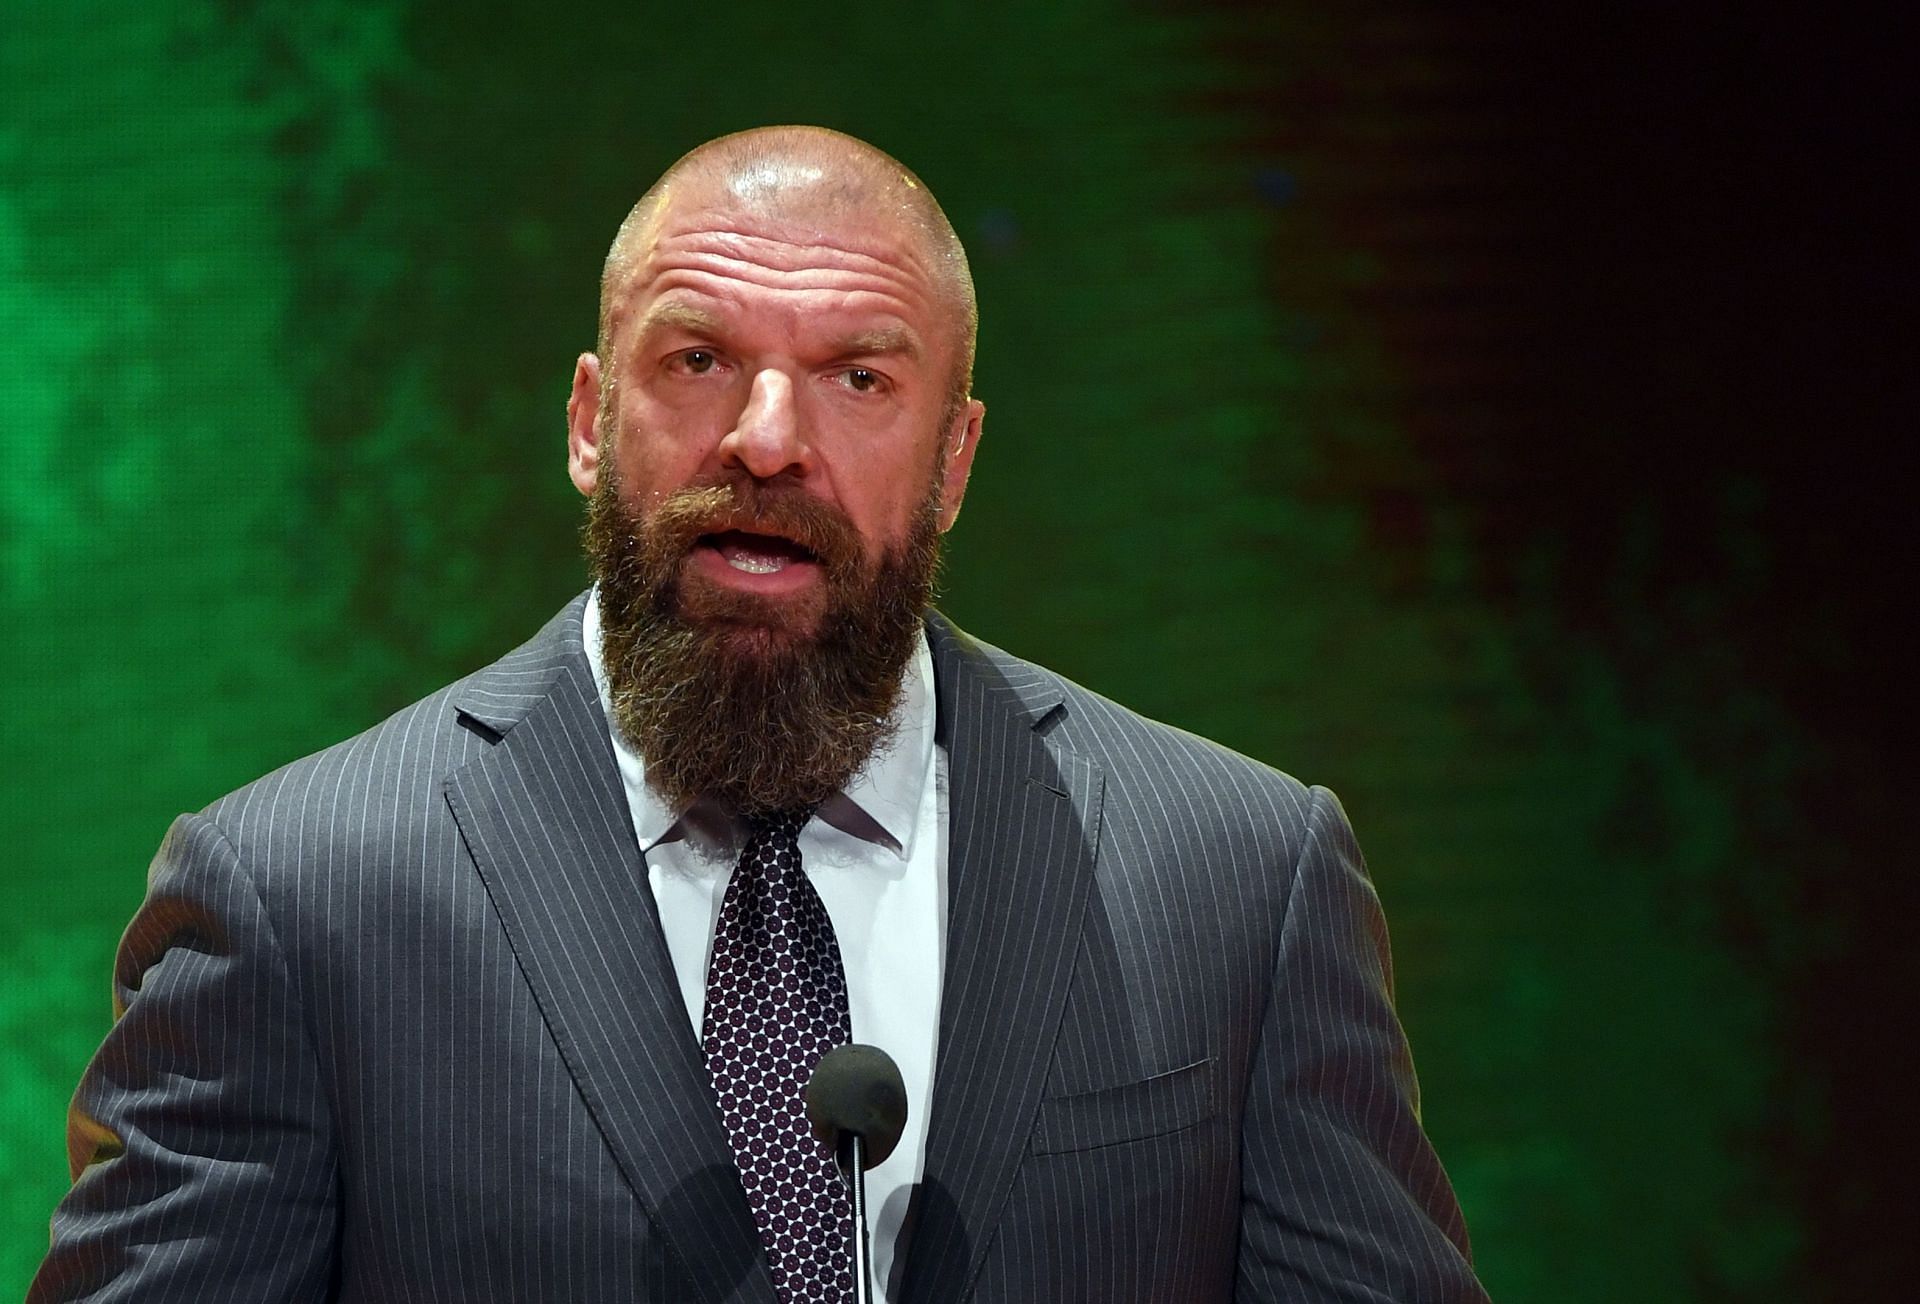 What surprises does Triple H have in store for the WWE Universe?